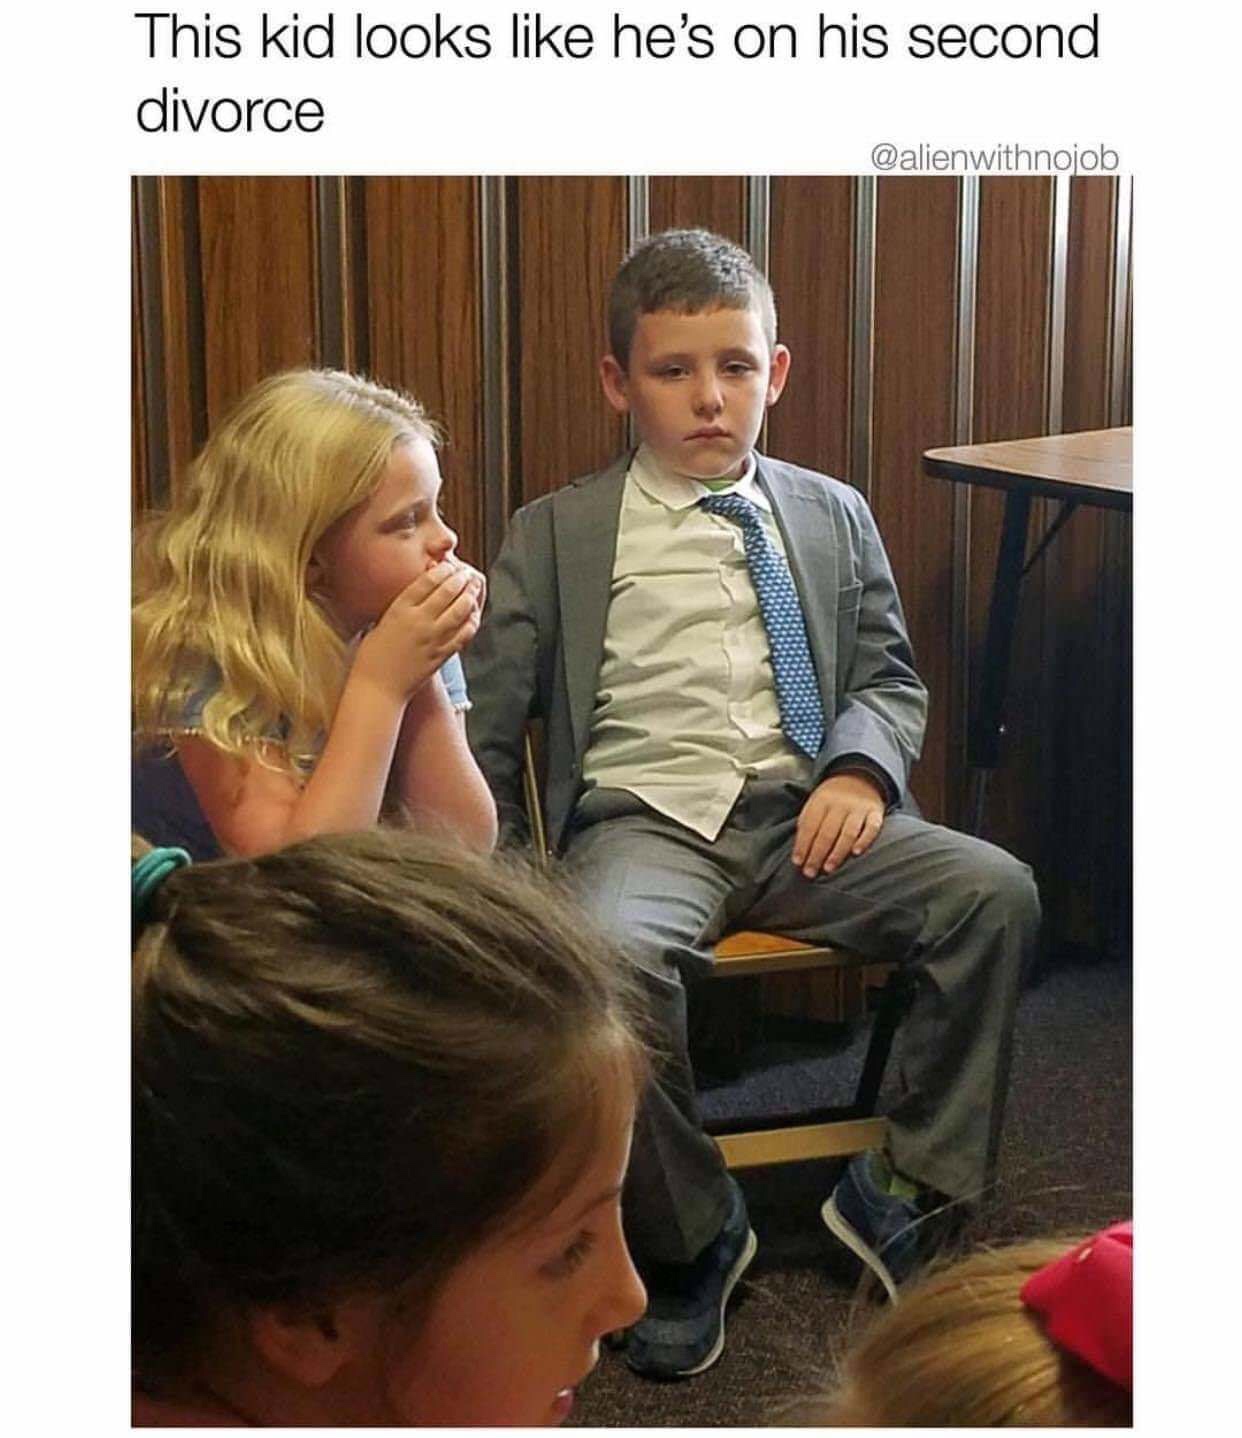 kid looks like he's on his second divorce - This kid looks he's on his second divorce